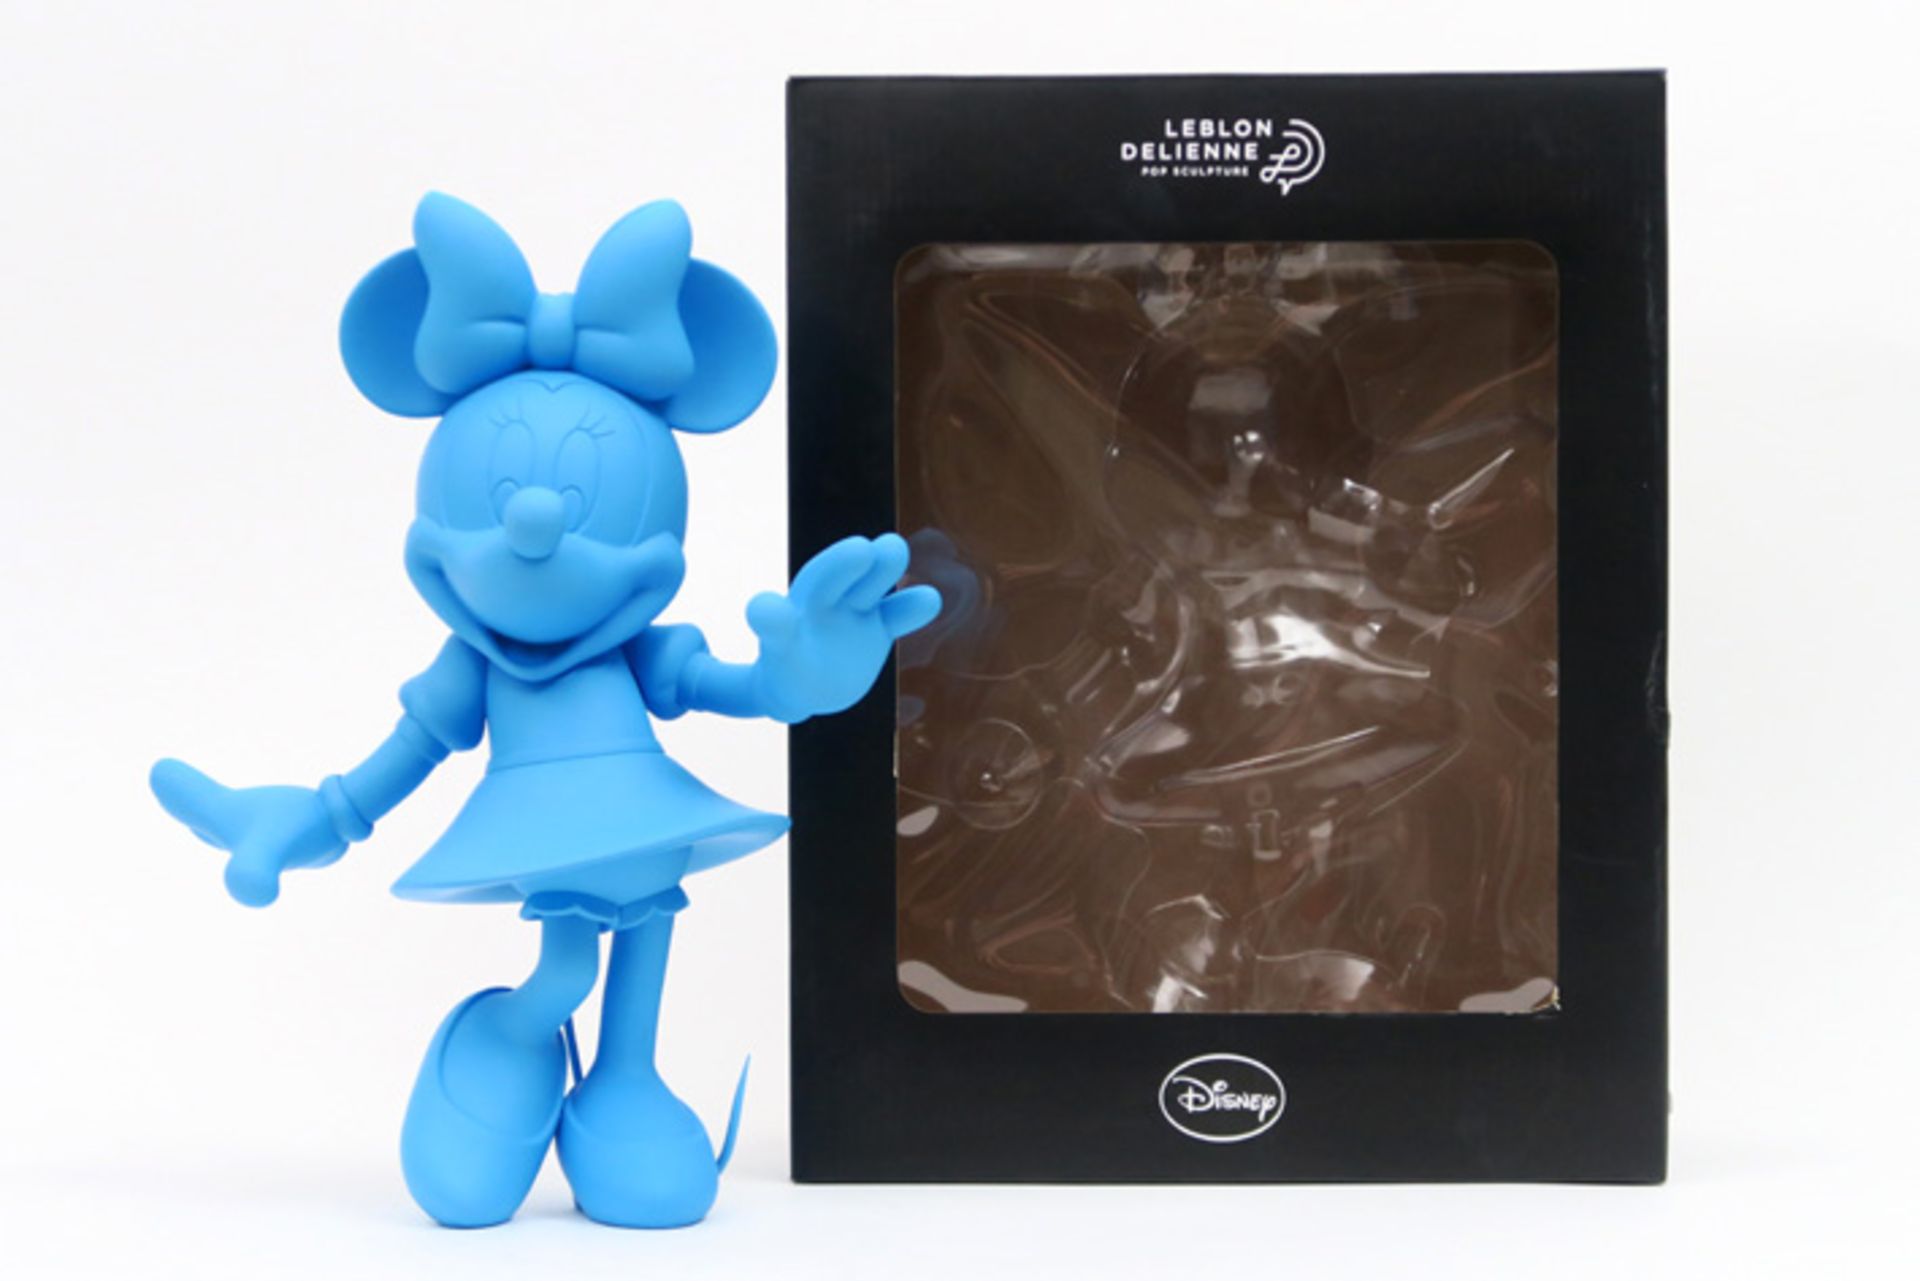 "Walt Disney Productions & Leblon & Delienne Pop Sculpture" Minnie Mouse marked and with certificate - Image 4 of 4